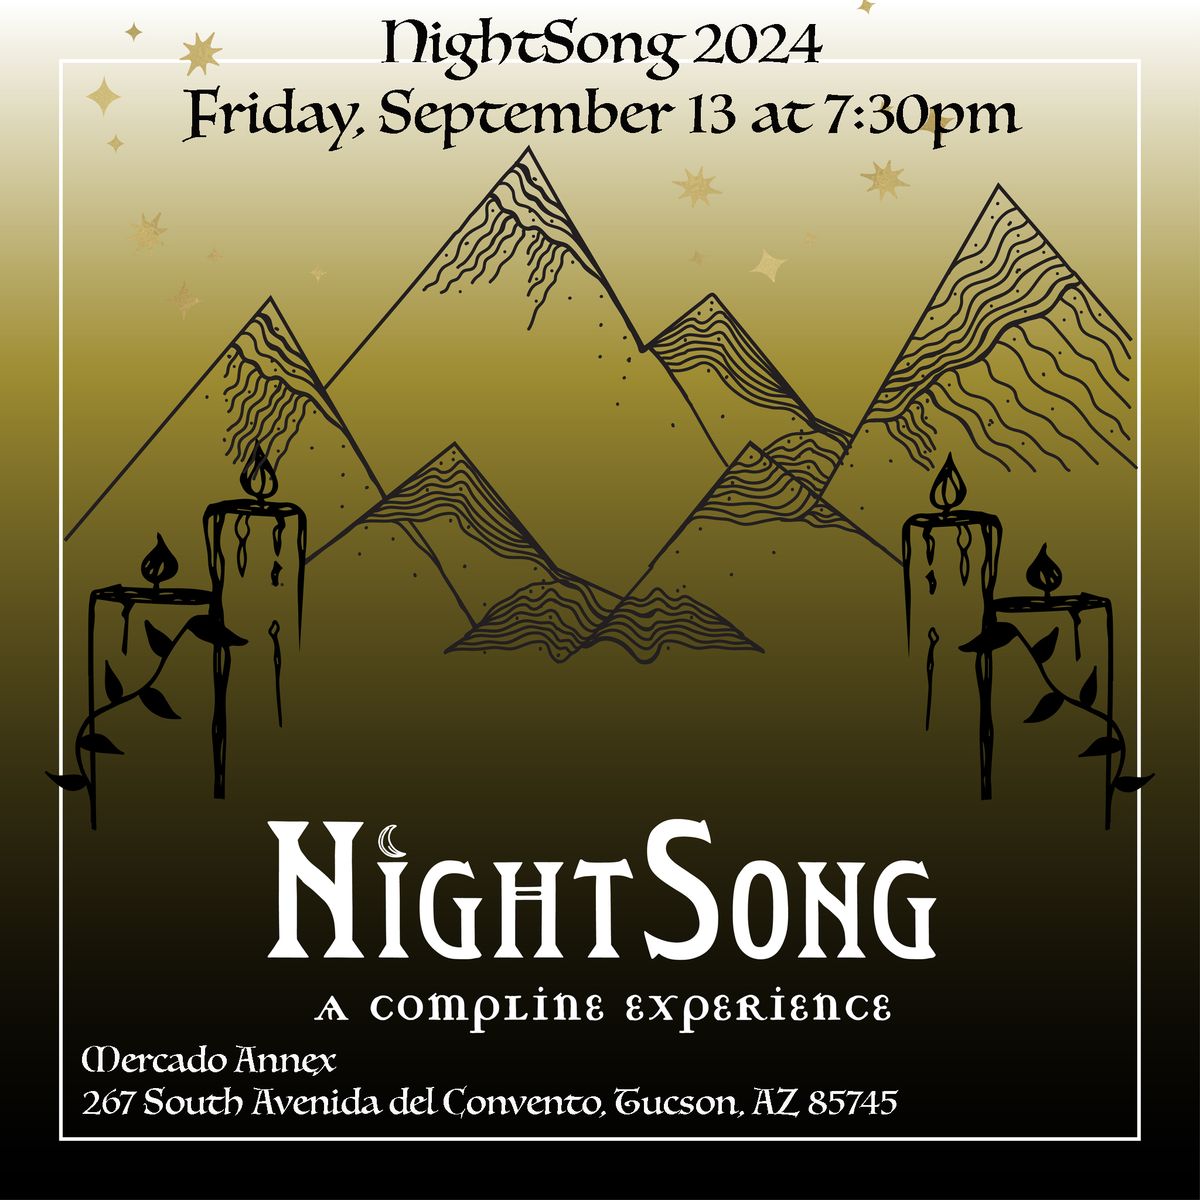 NightSong Compline Experience